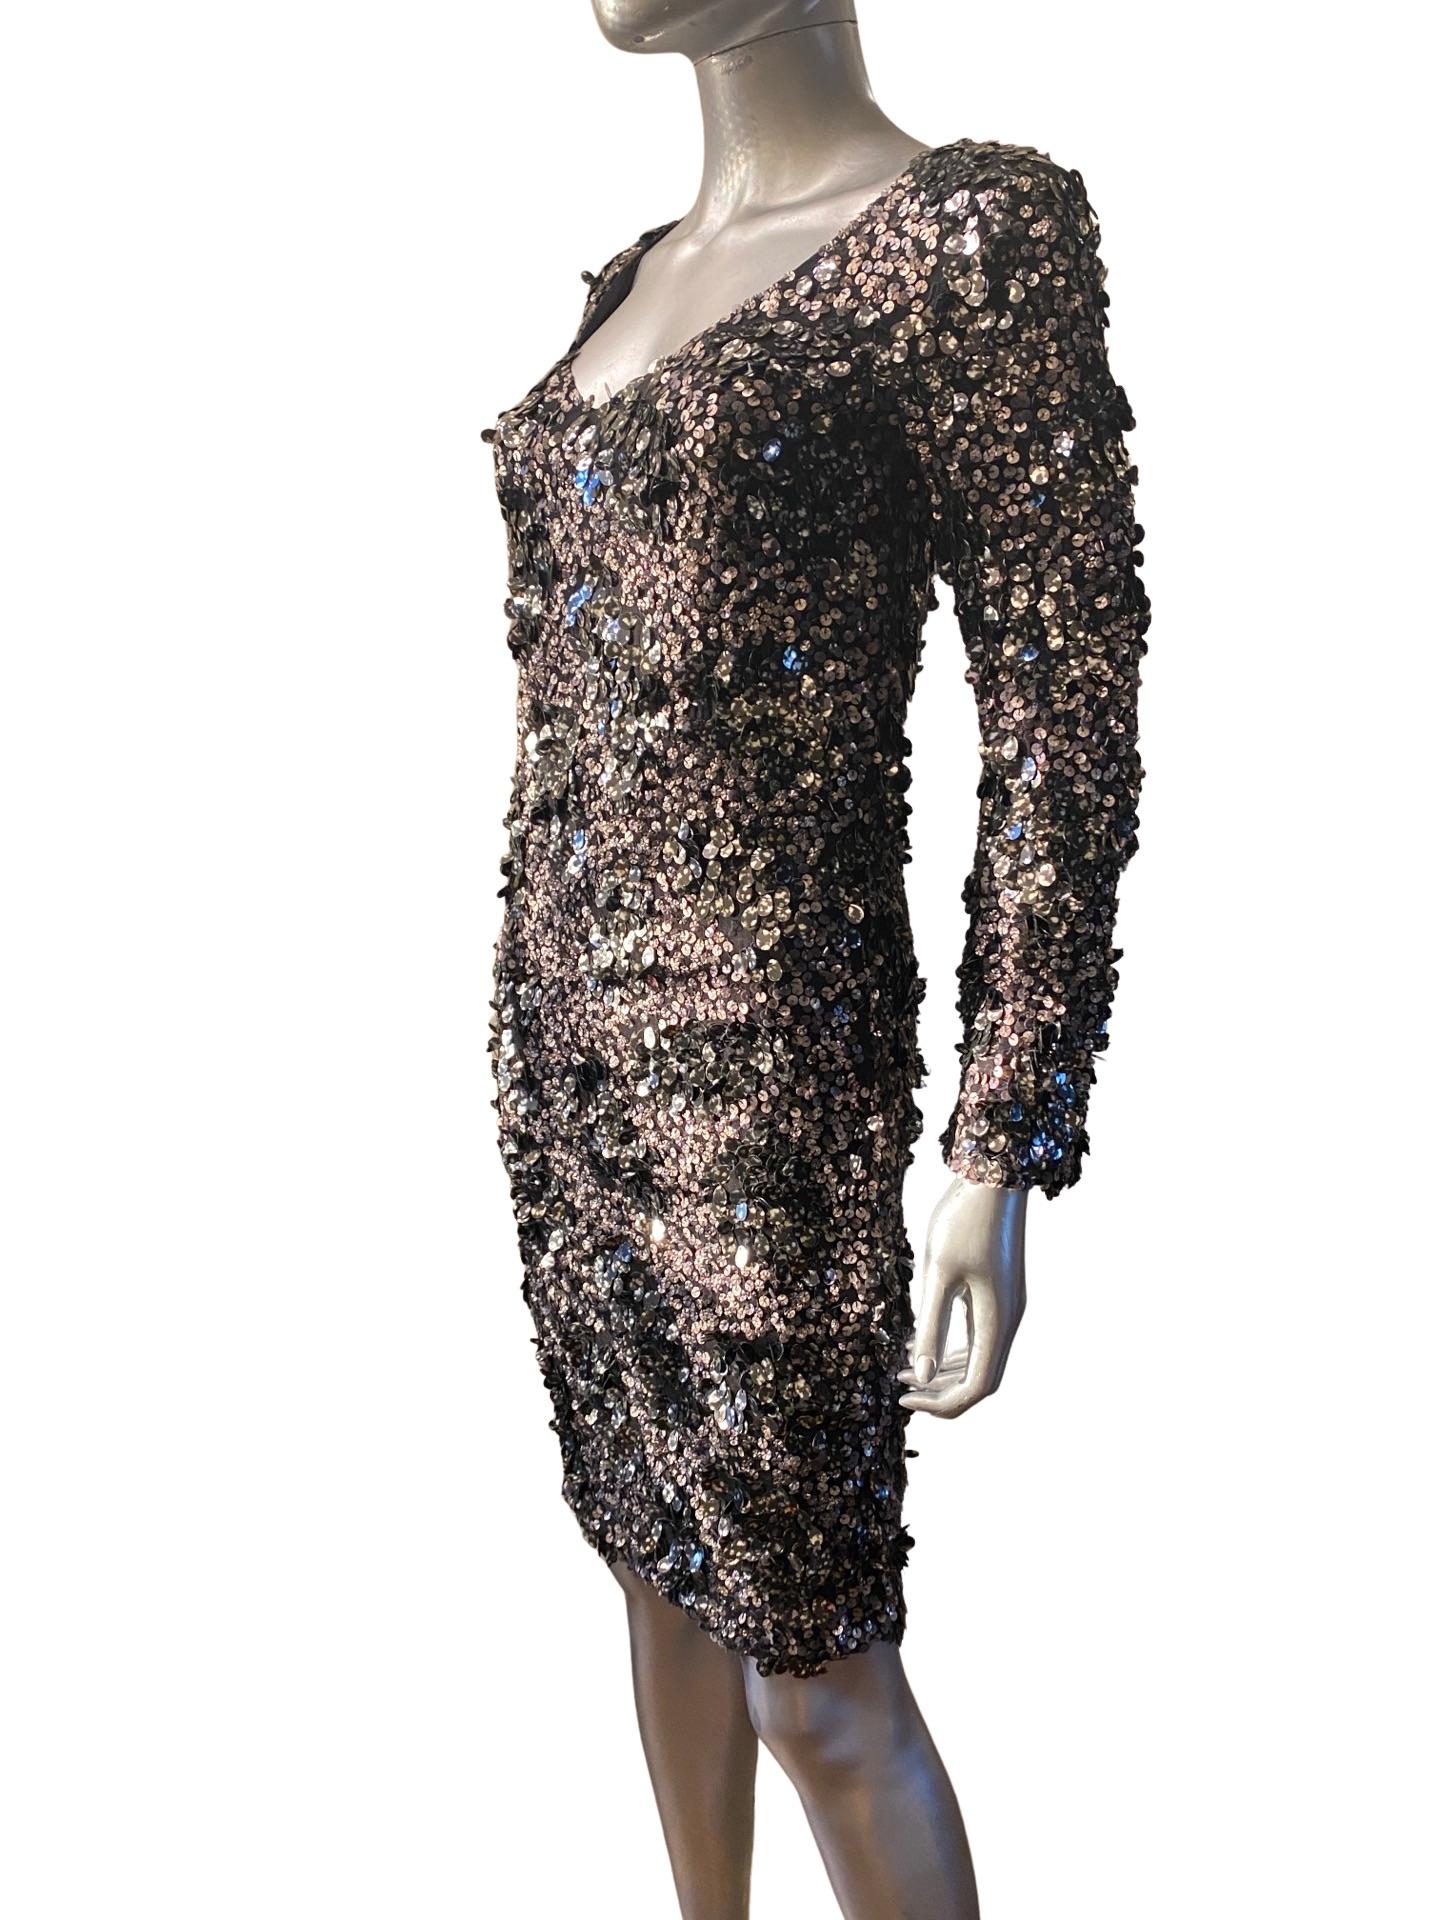 St John Couture Modern Silk Dress with 3D Shimmy  Sexy Dangling Sequins Size 2.  For Sale 1